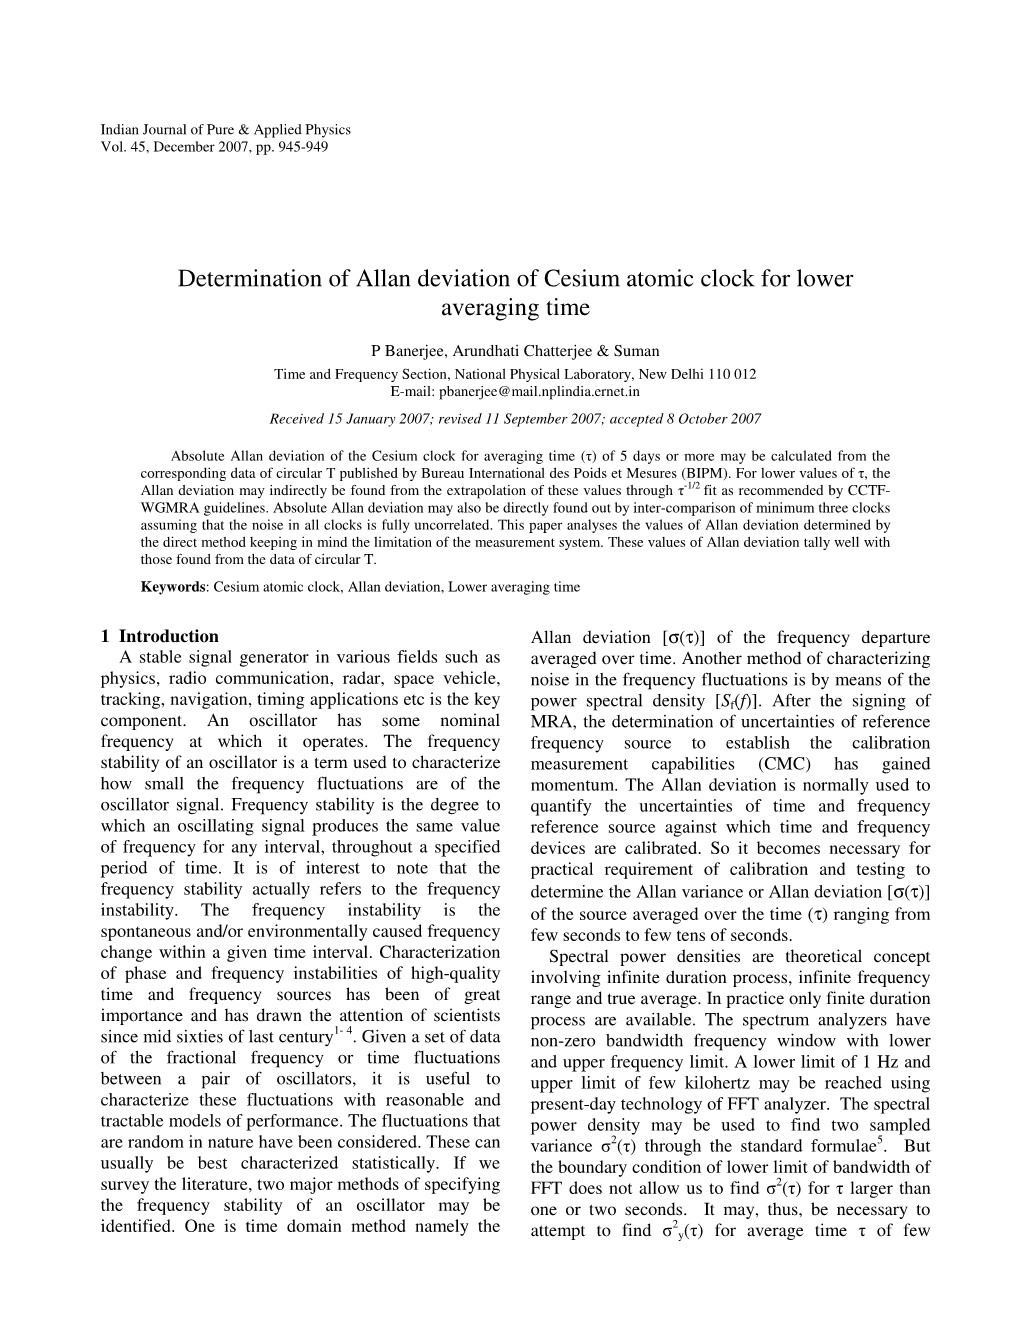 Determination of Allan Deviation of Cesium Atomic Clock for Lower Averaging Time